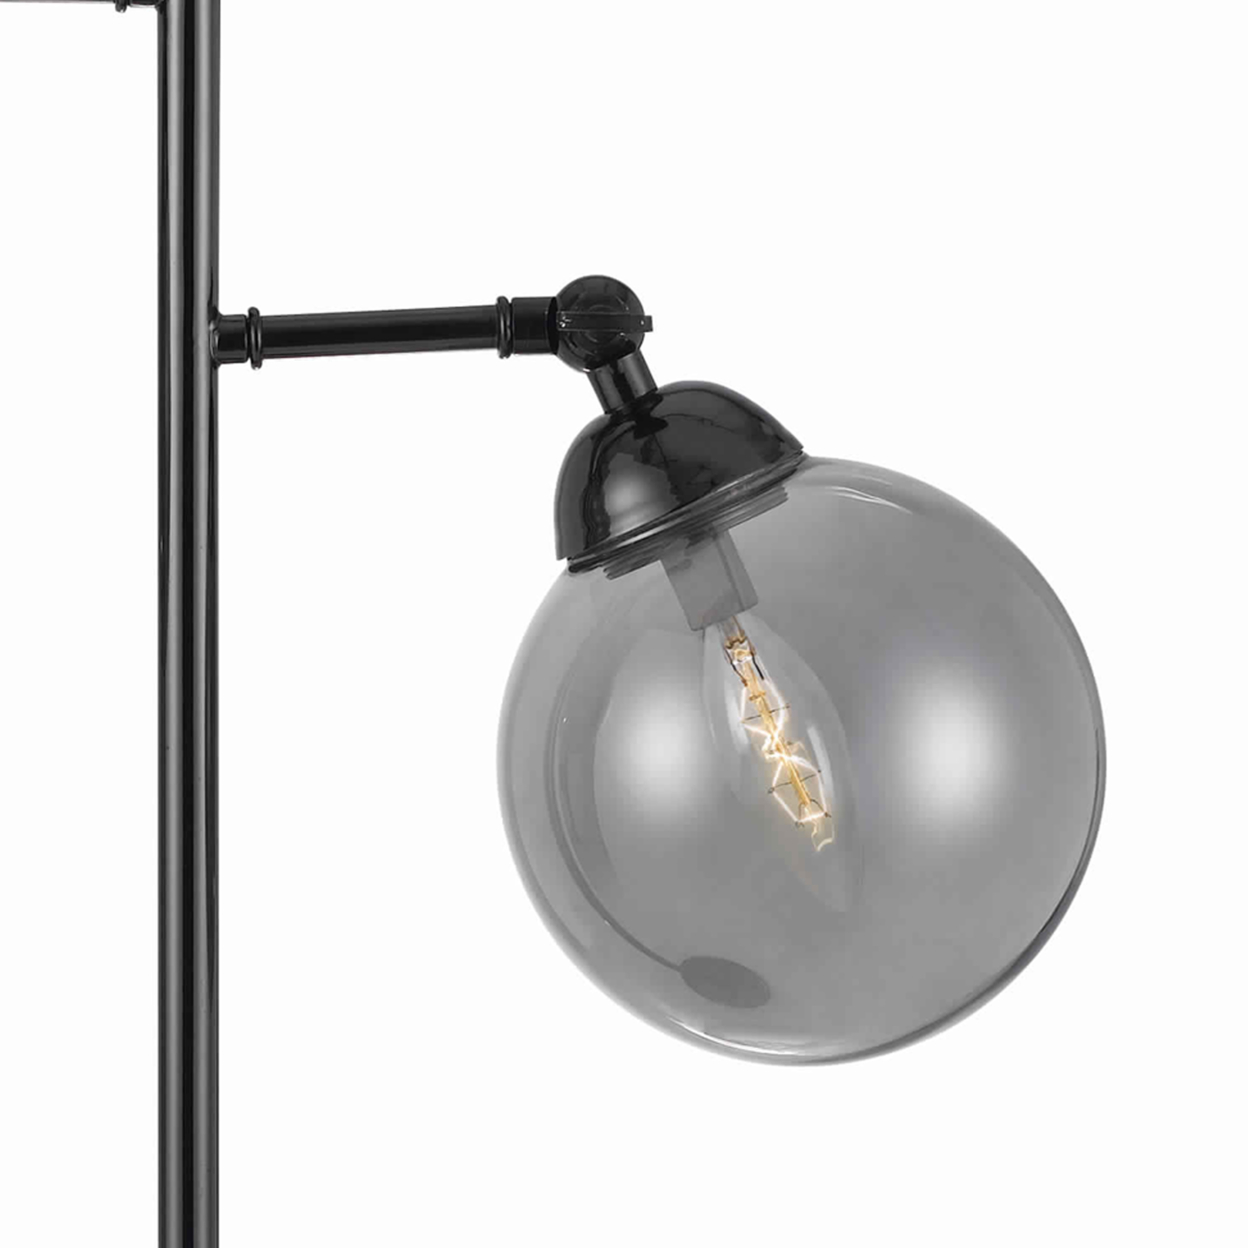 Industrial Metal Body Table Lamp With Two Glass Ball Shades, Black- Saltoro Sherpi